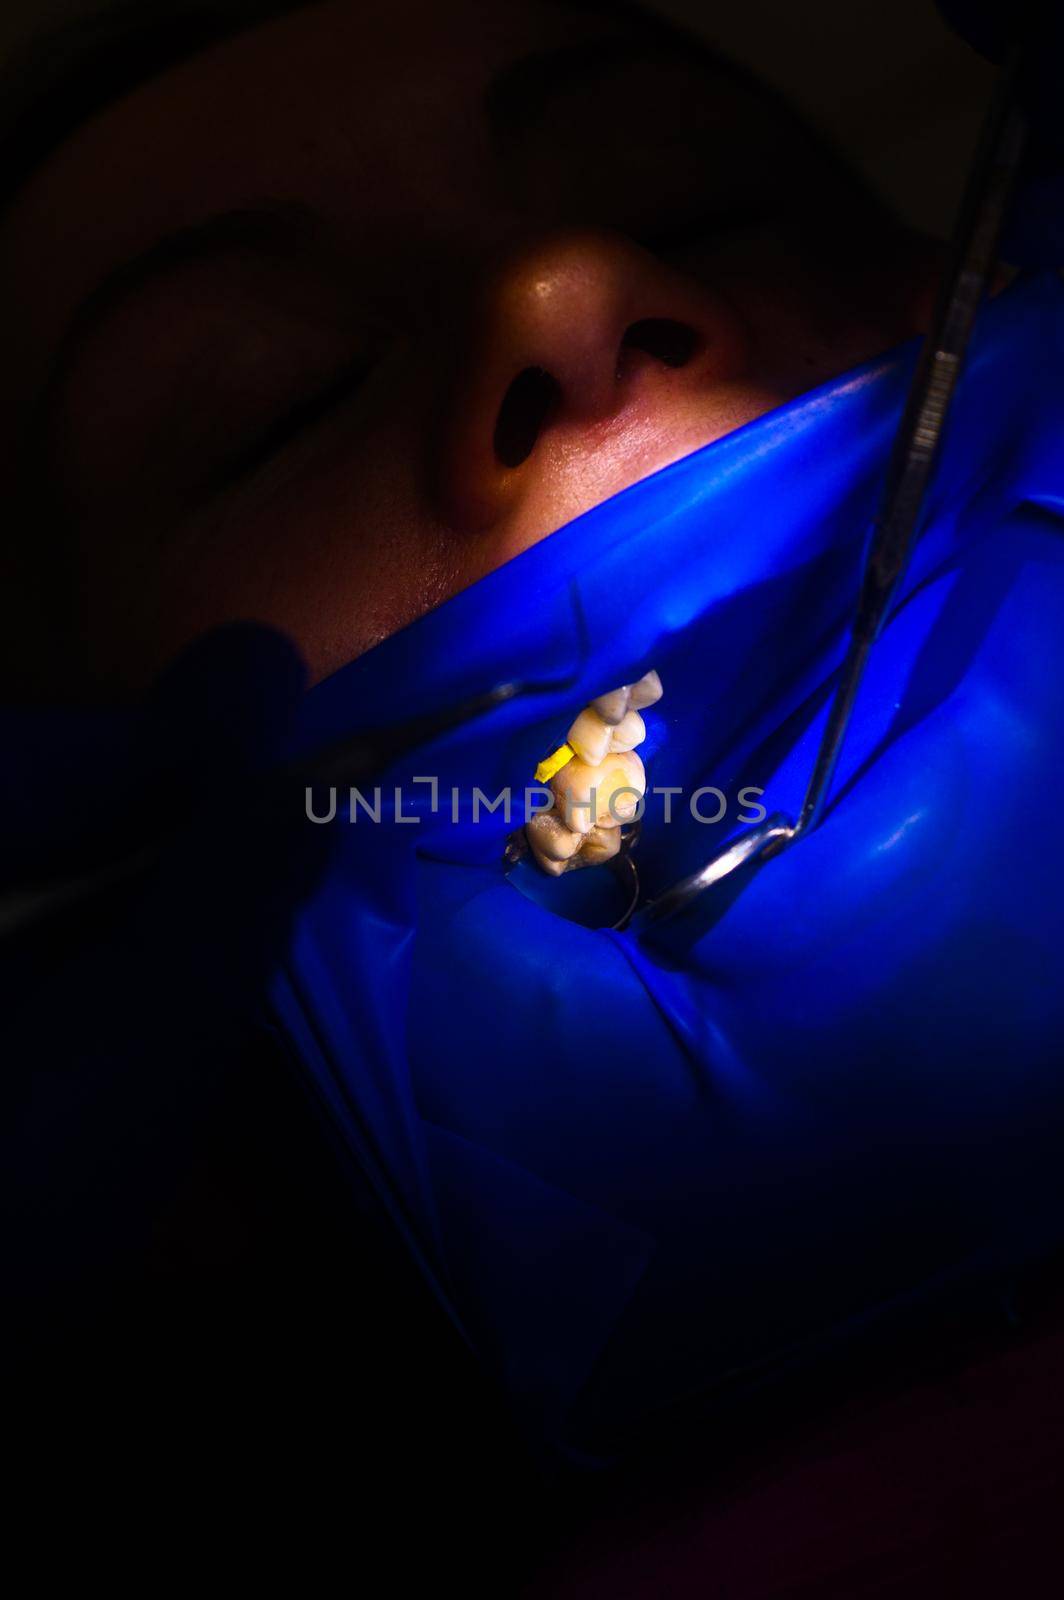 Close-up of the patient's mouth after filling the teeth with white composite resin on the insulation of a rubber dam, rubber dam and dental mirror. new